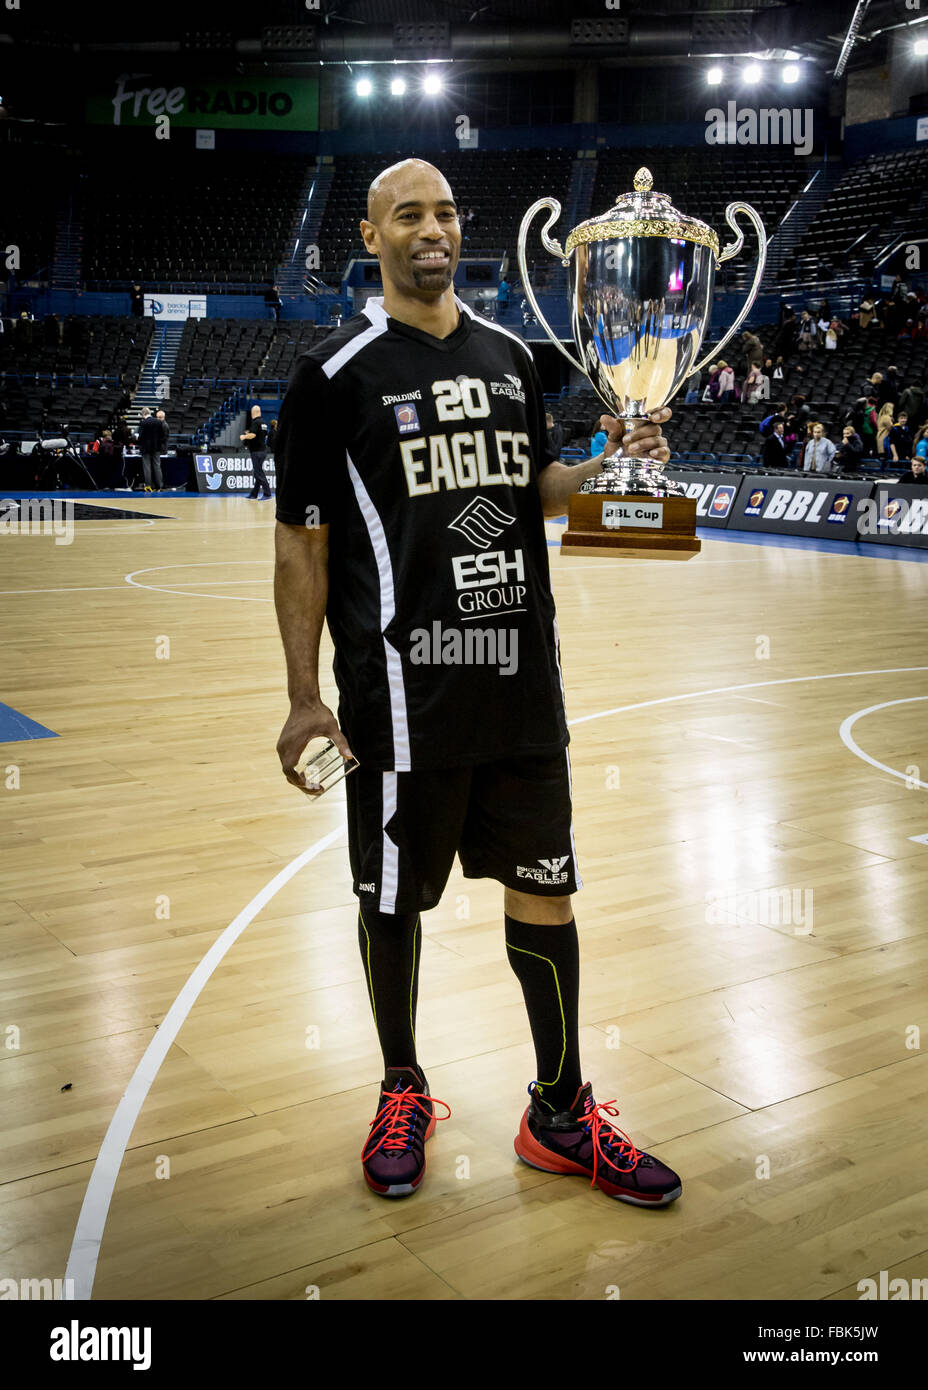 The Bbl Cup Final High Resolution Stock Photography and Images - Alamy